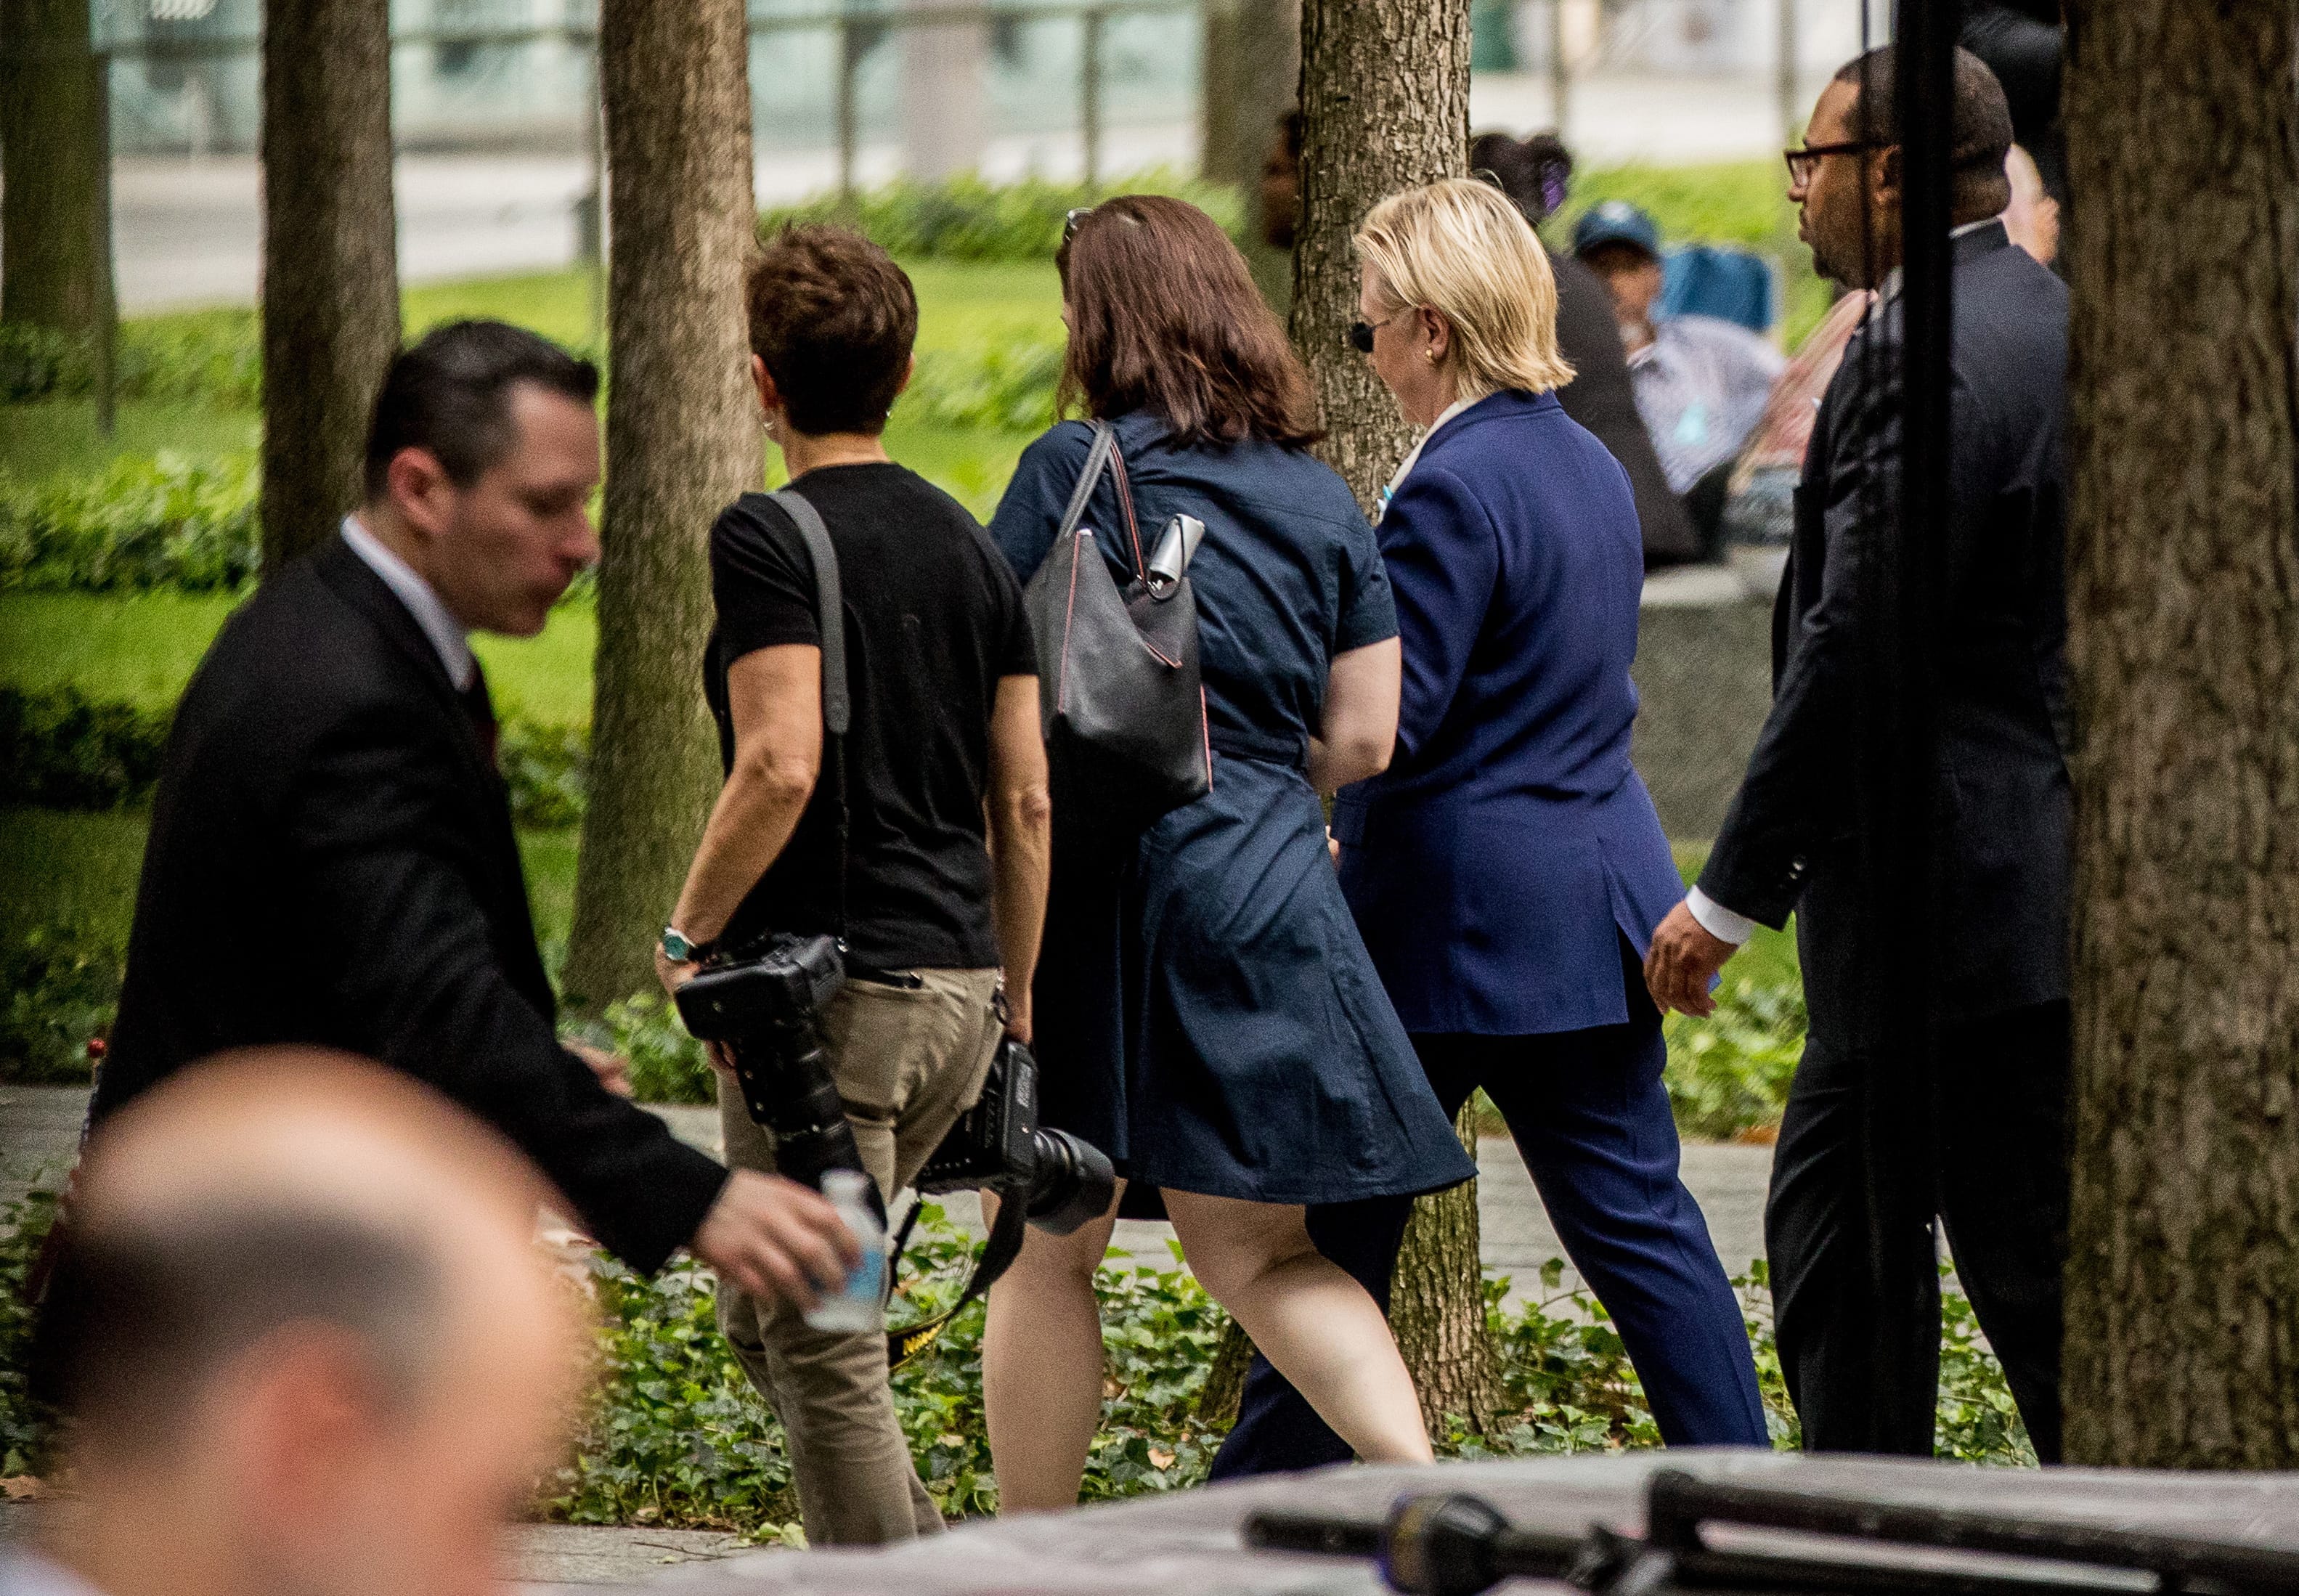 Democratic presidential candidate Hillary Clinton, second from right, departs after attending a ceremony at the Sept. 11 memorial, in New York, Sunday, Sept. 11, 2016, on the 15th anniversary of the Sept. 11 attacks.